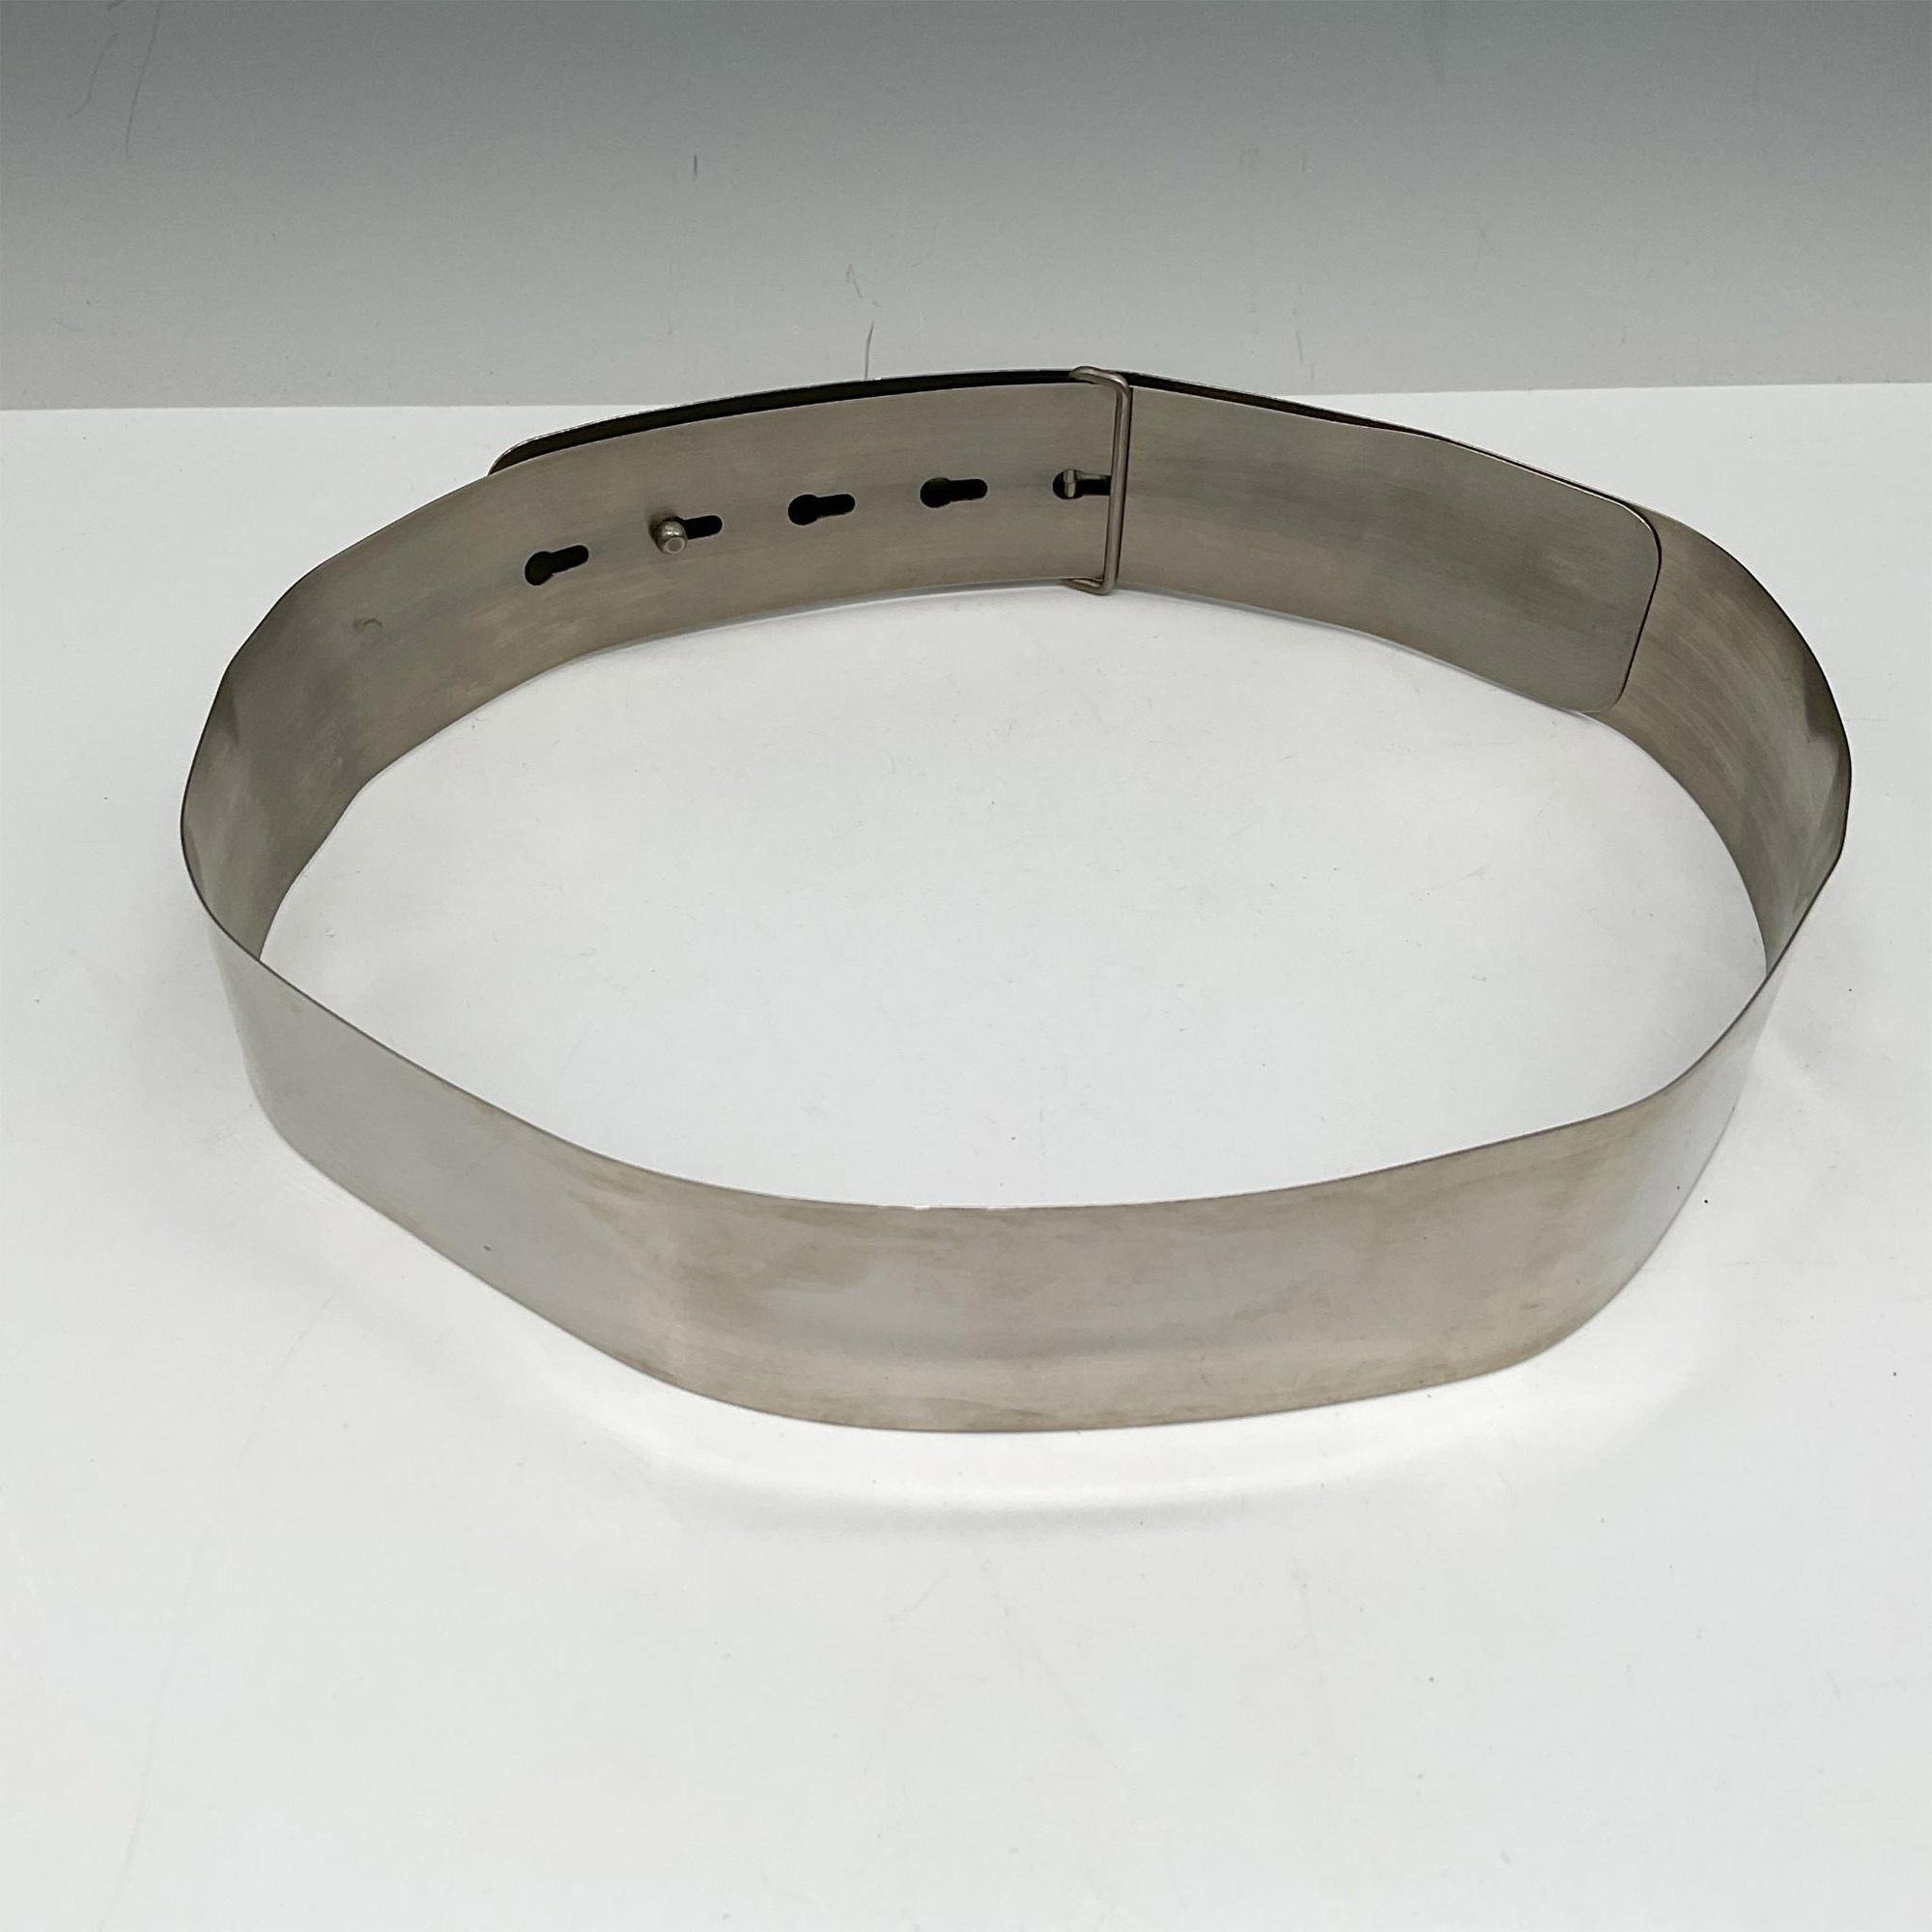 Versace Silver Metal Belt, Size Small - Image 2 of 3